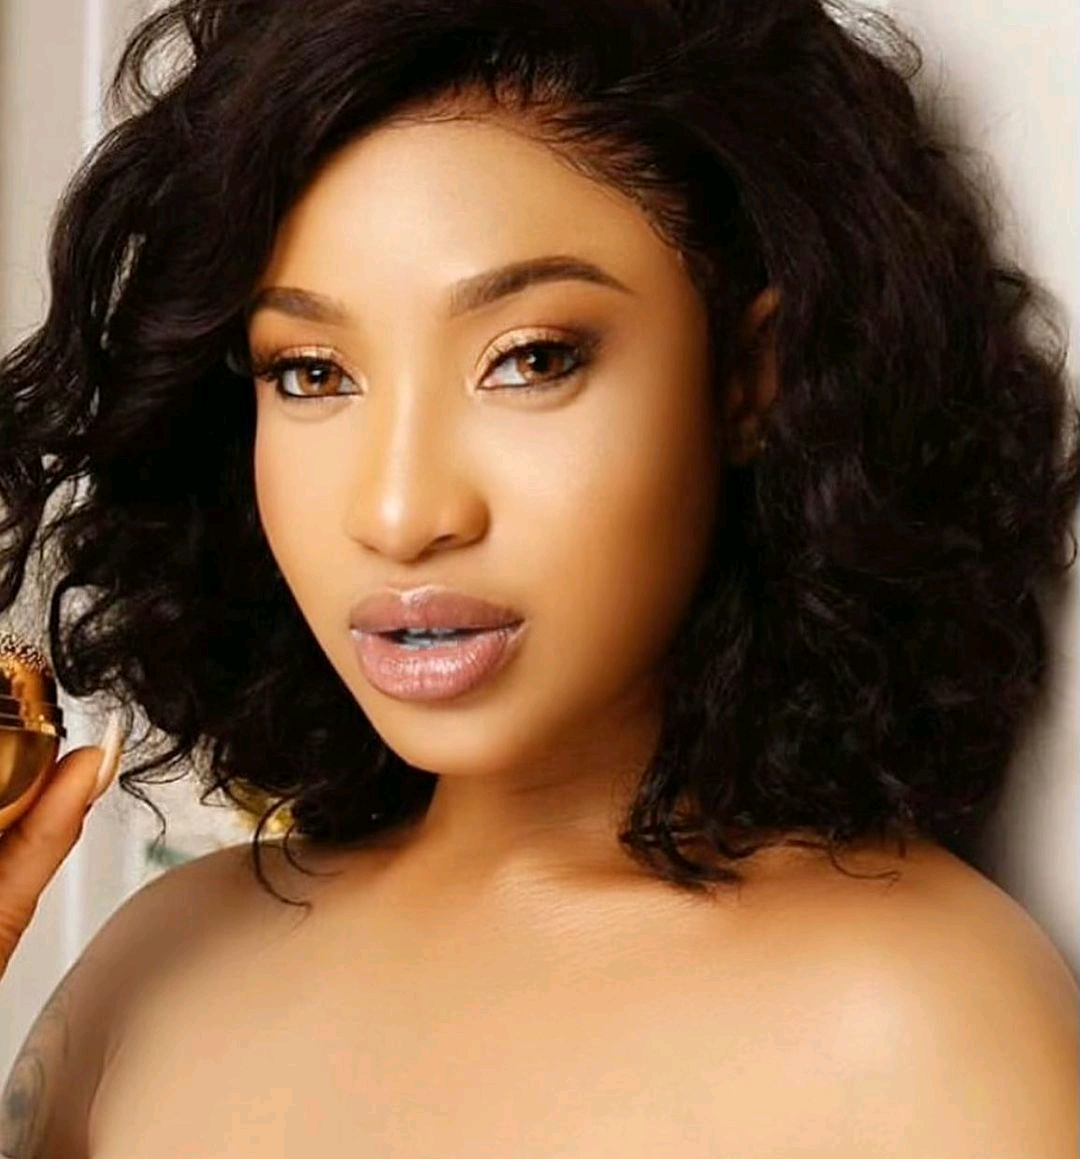 It Took Me Years Of Pain To Get To My Place Of Peace - Tonto Dikeh